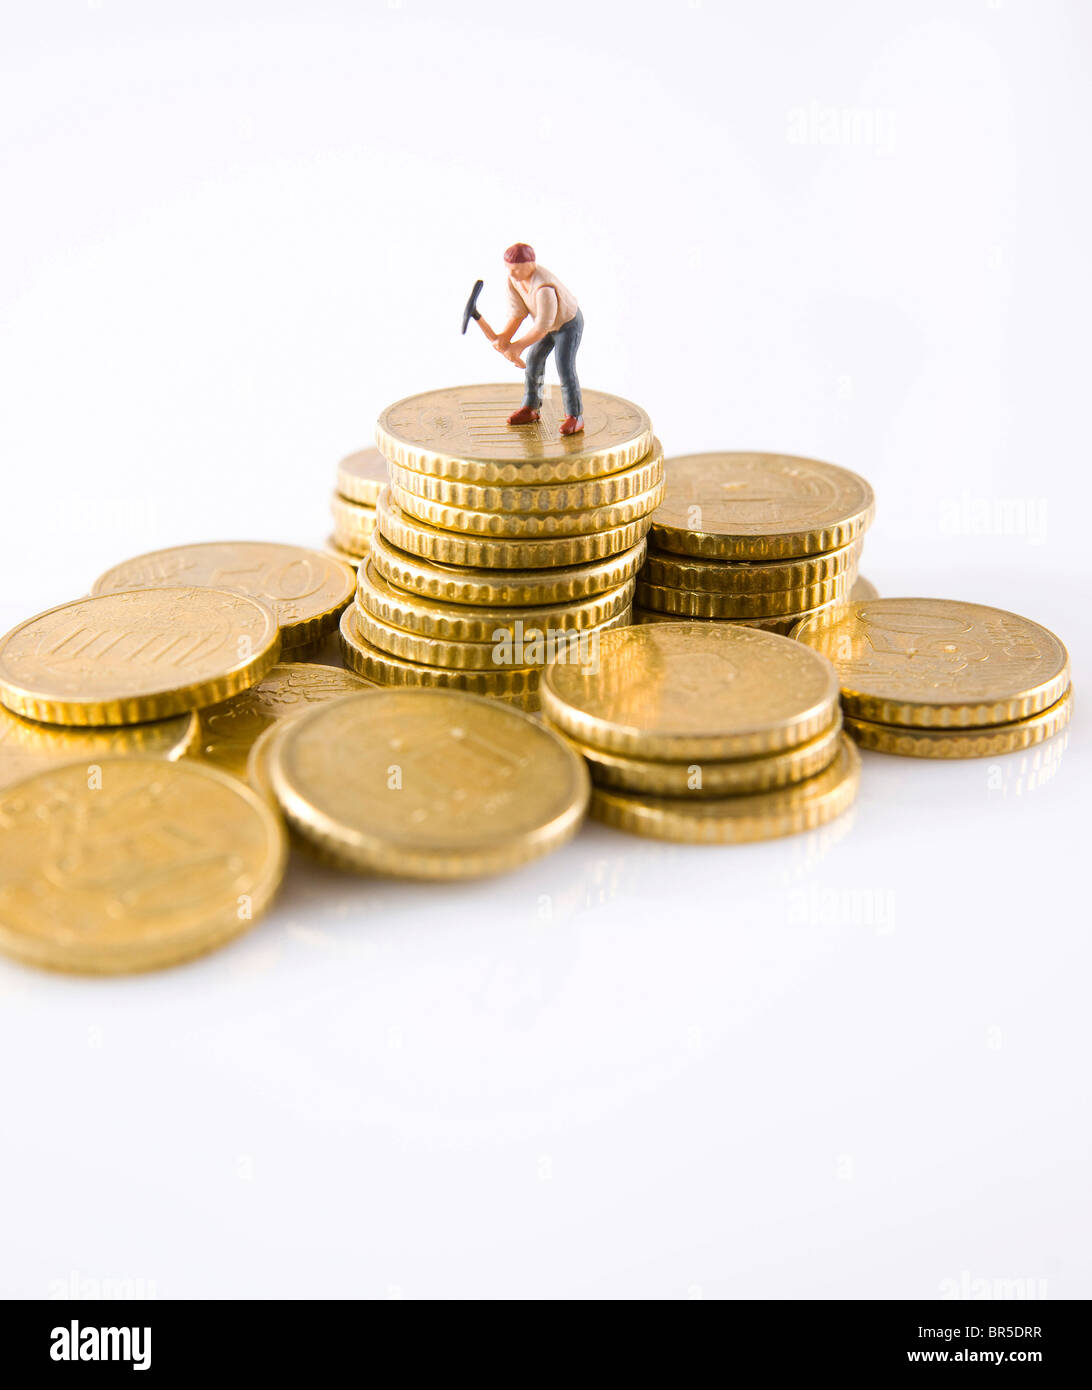 Figur of a man with a pick on a stack of coins Stock Photo